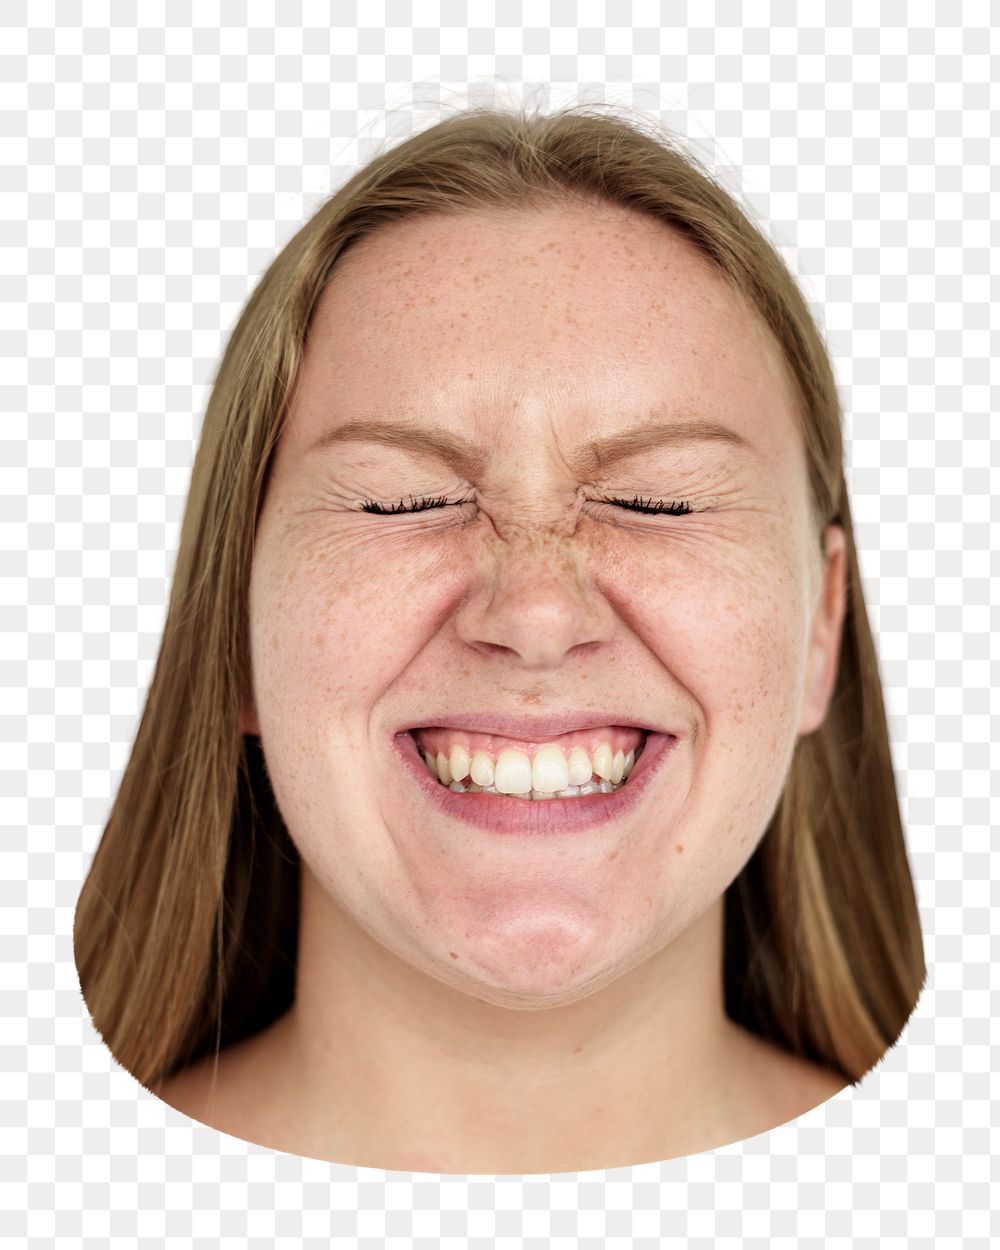 woman smiling png, transparent background